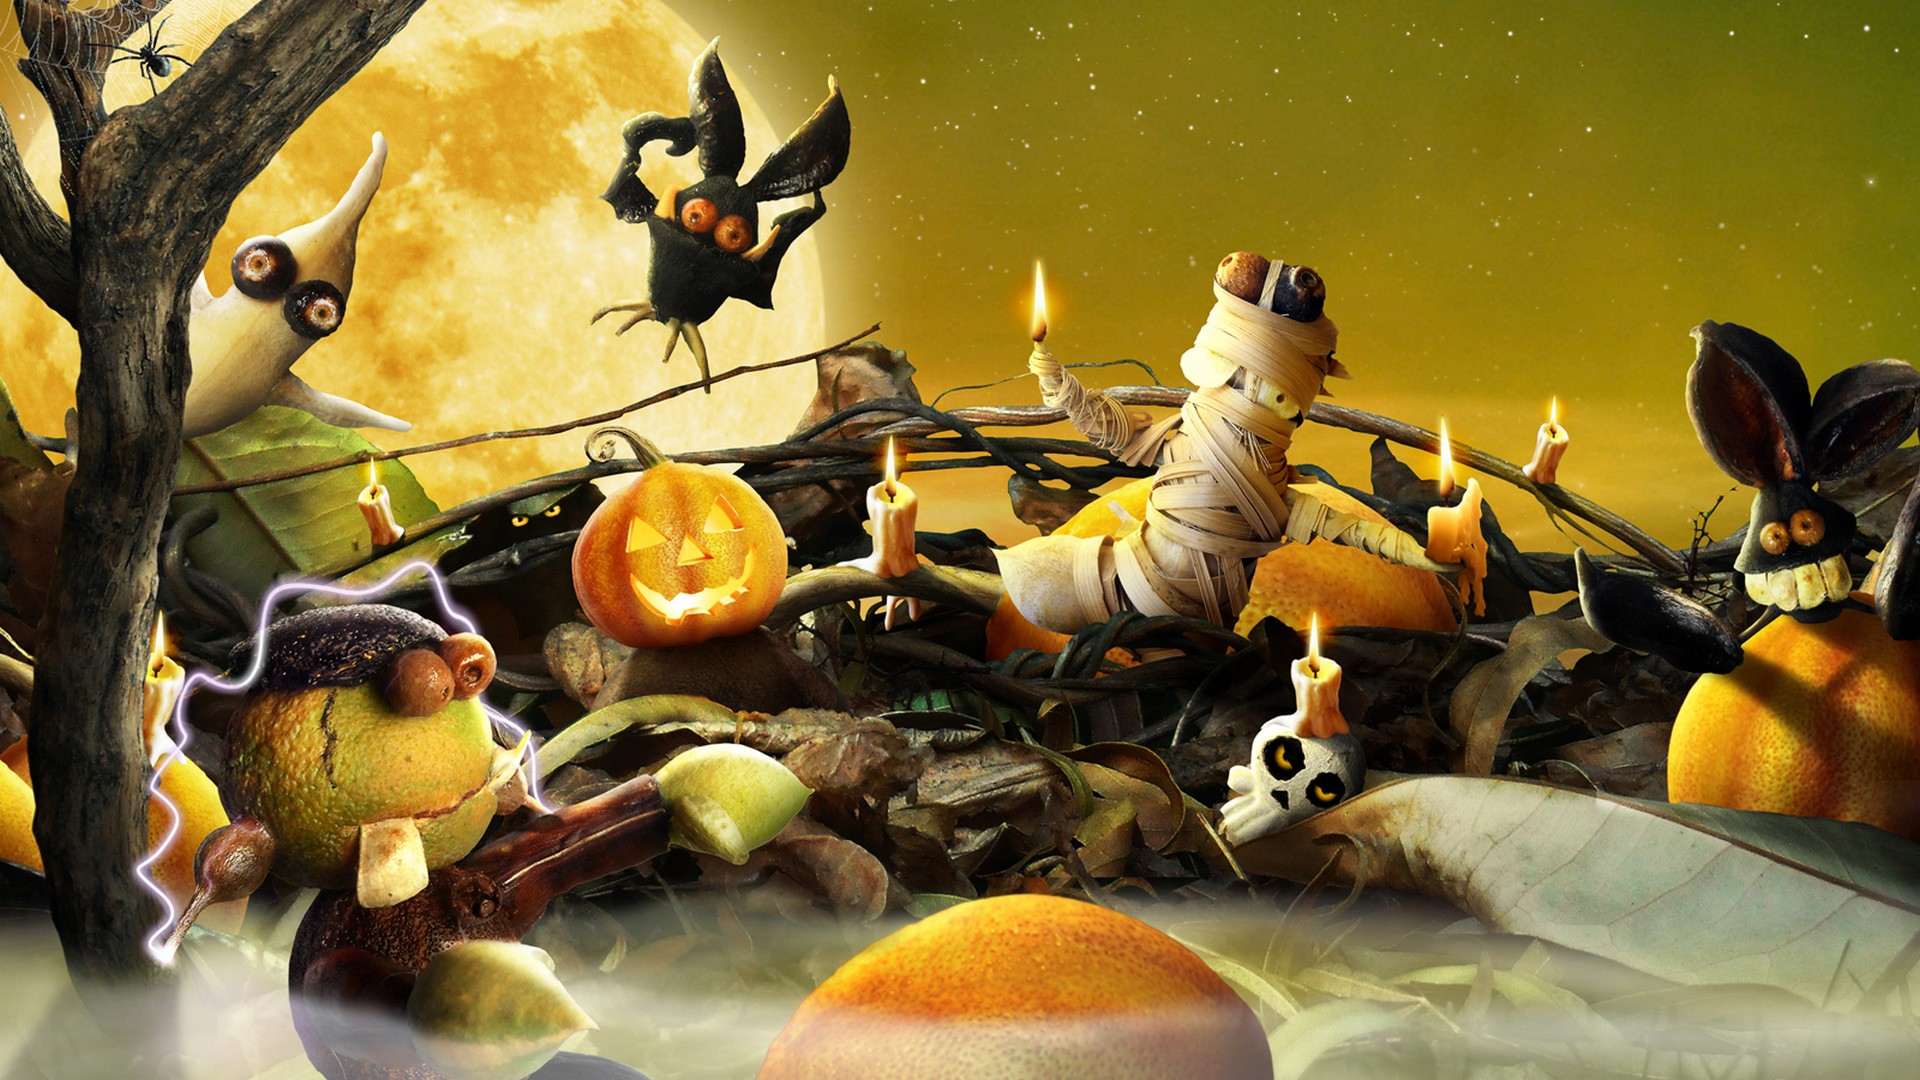 Halloween Desktop Backgrounds HD with high-resolution 1920x1080 pixel. You can use this wallpaper for your Windows and Mac OS computers as well as your Android and iPhone smartphones